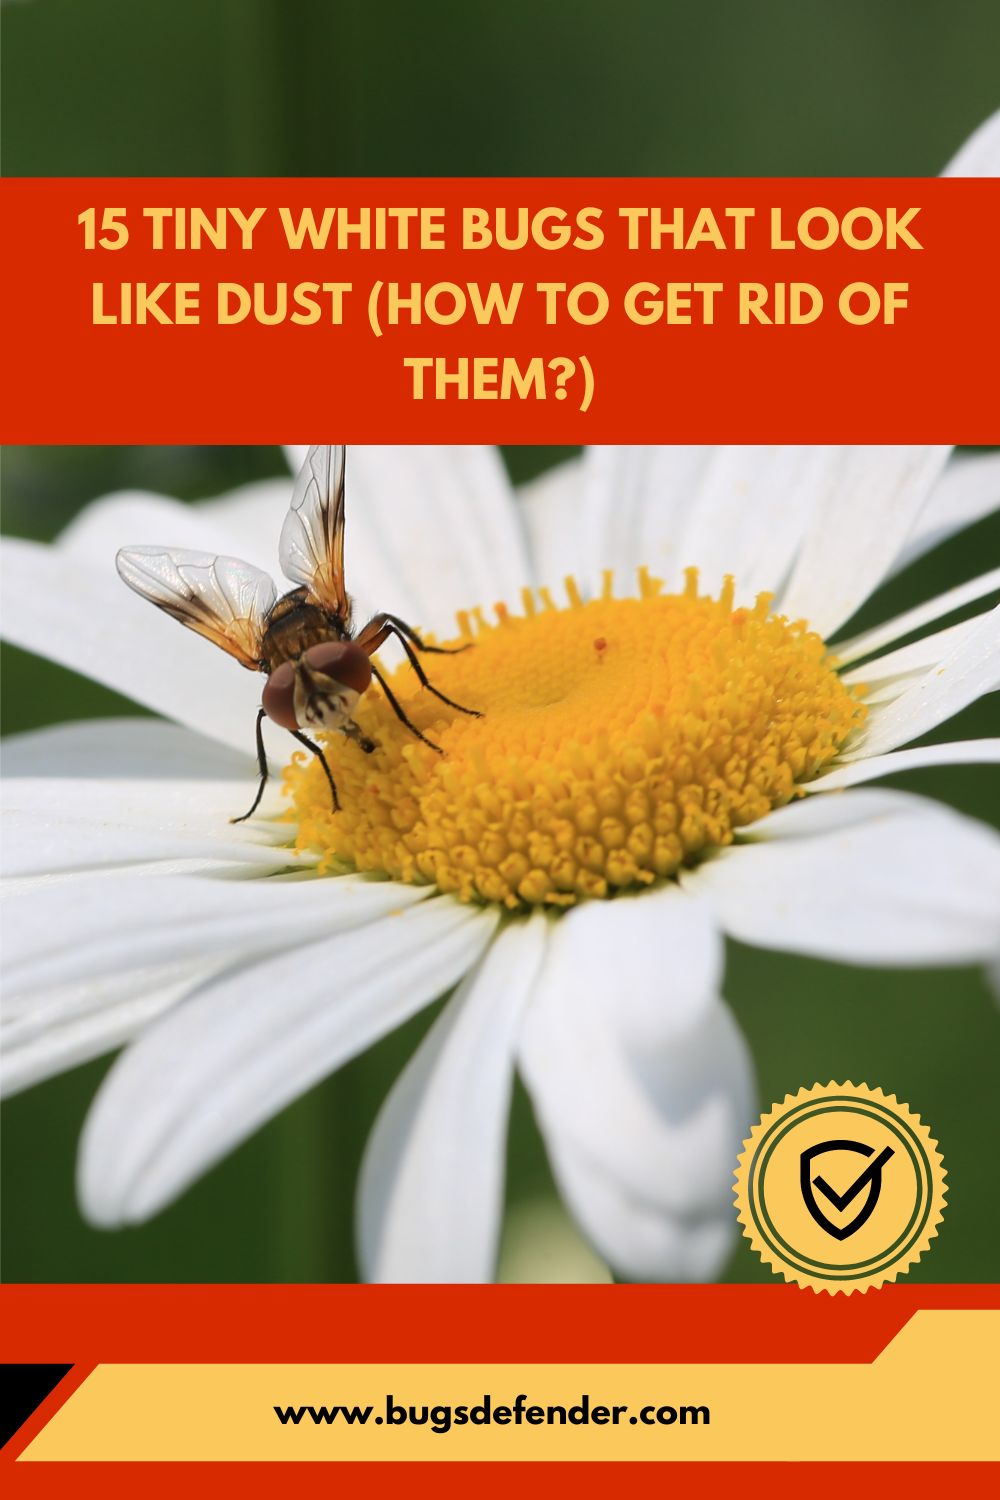 15 Tiny White Bugs that Look Like Dust (How to Get Rid of Them) pin2